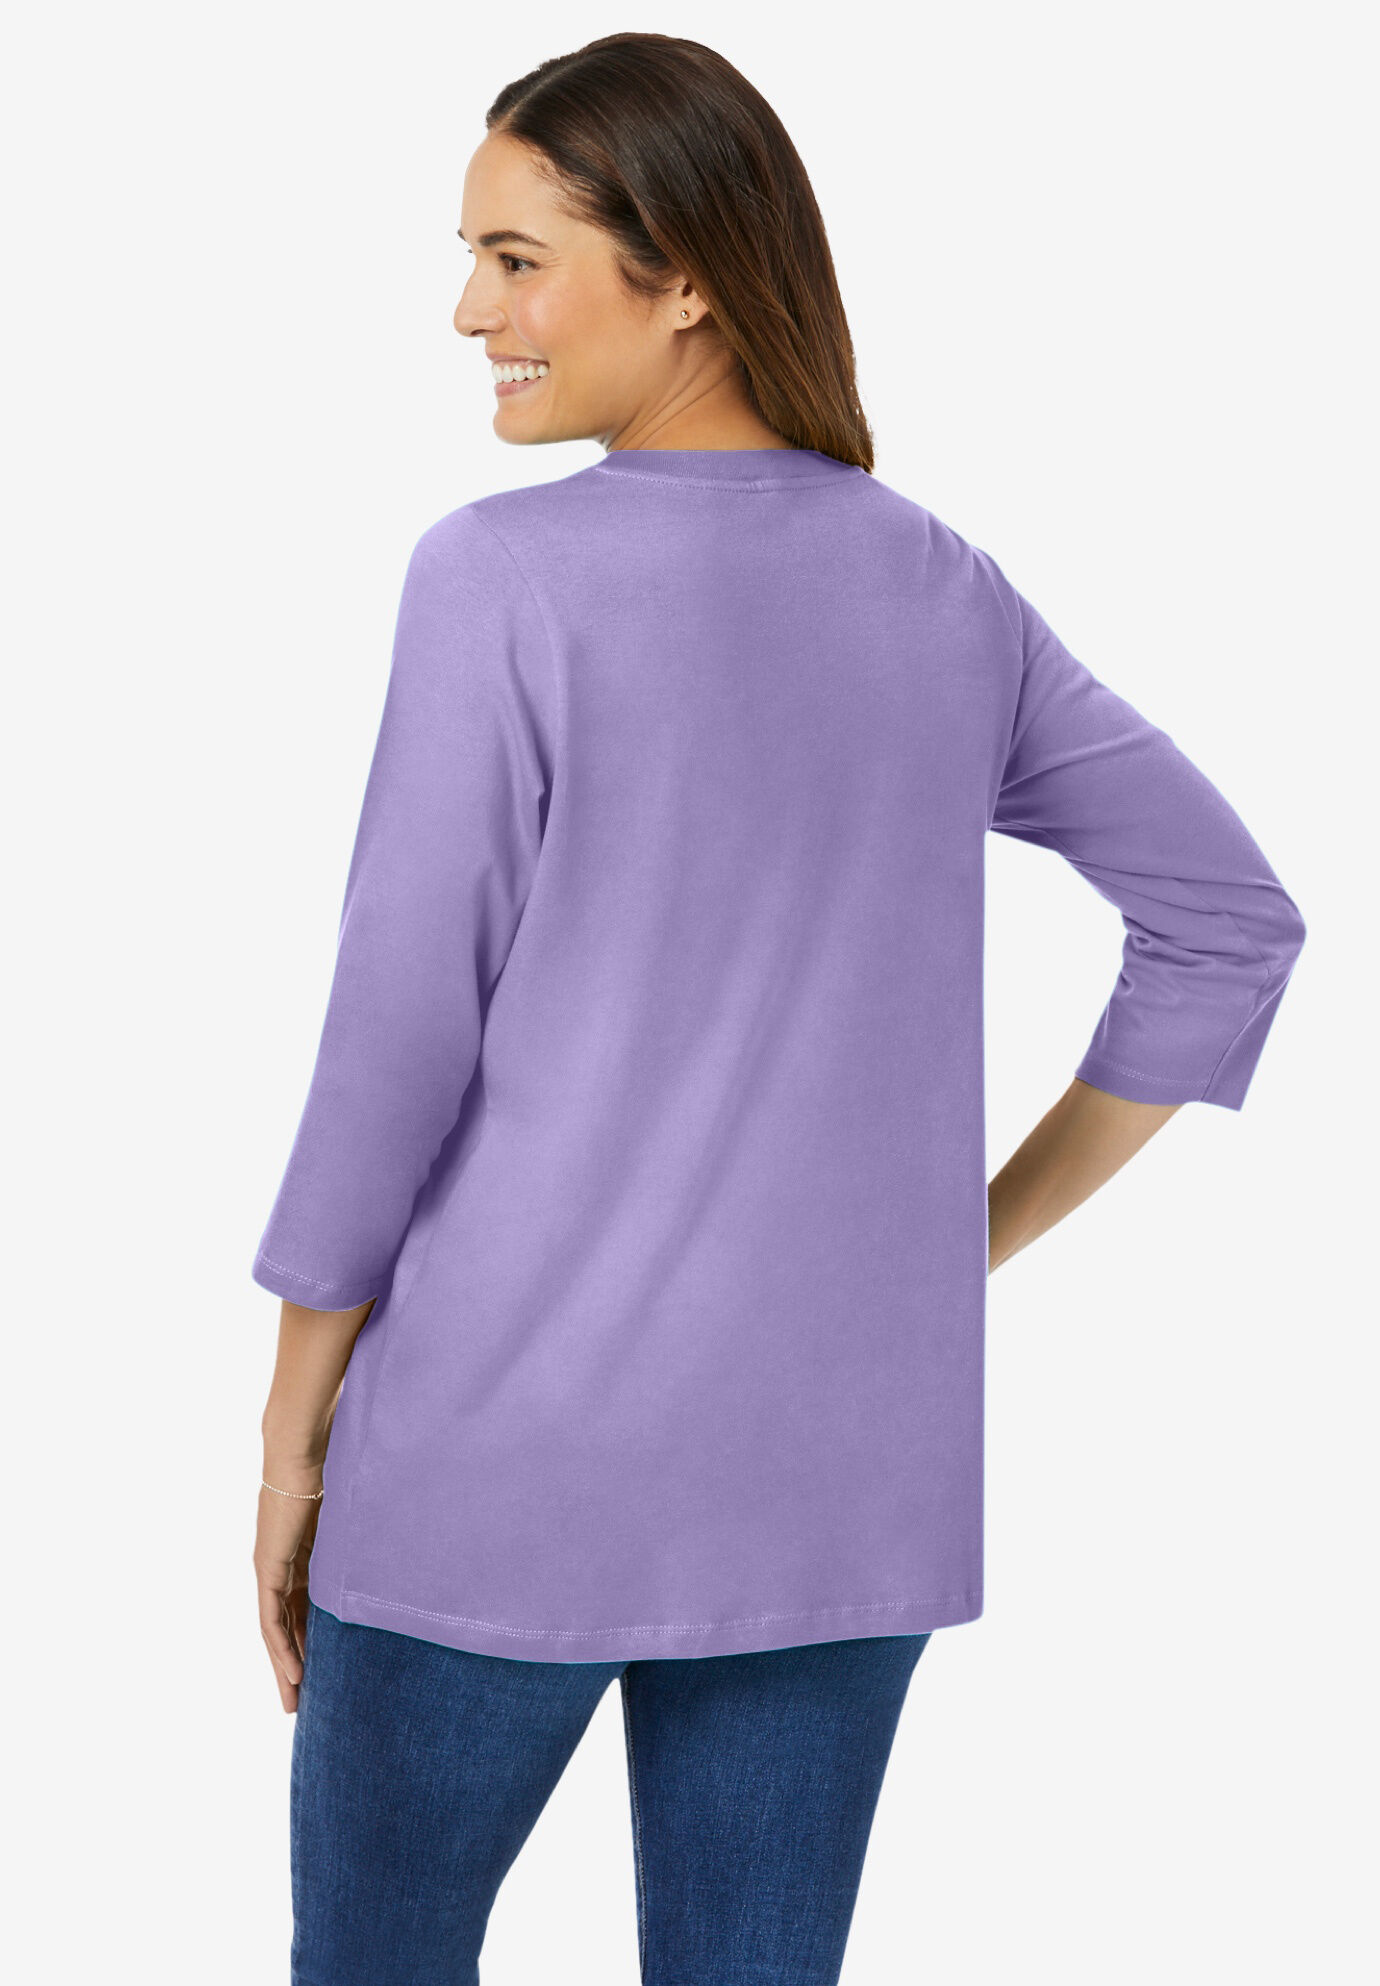 Perfect Three-Quarter Sleeve V-Neck Tee | Woman Within